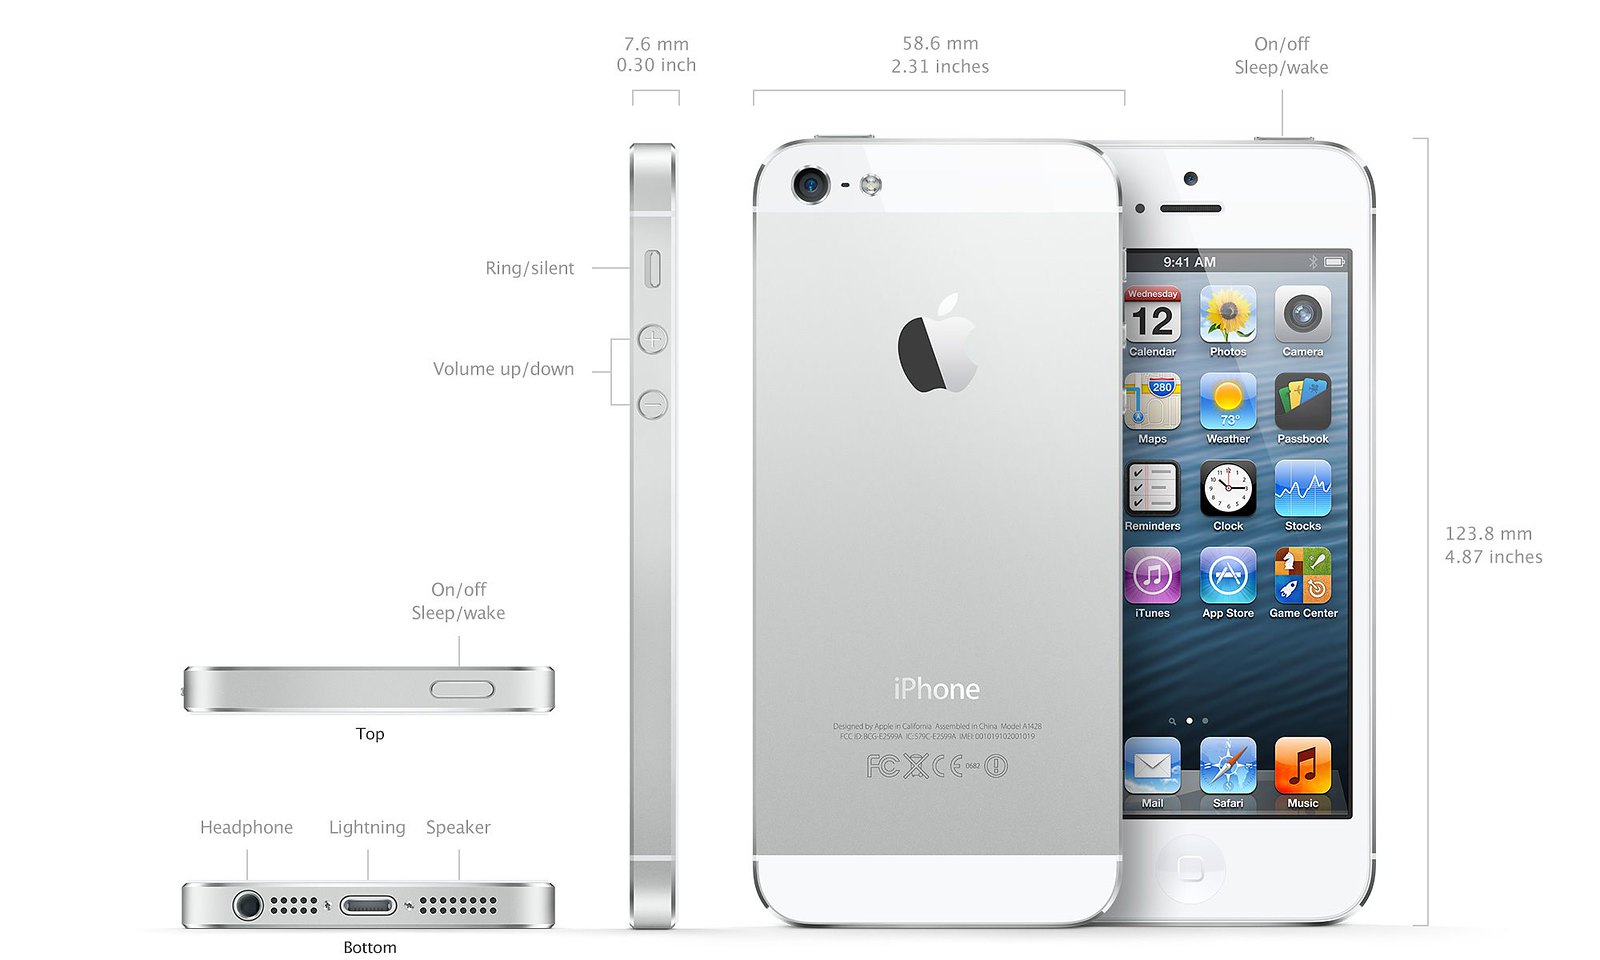 Iphone 5 White Or Black Poll